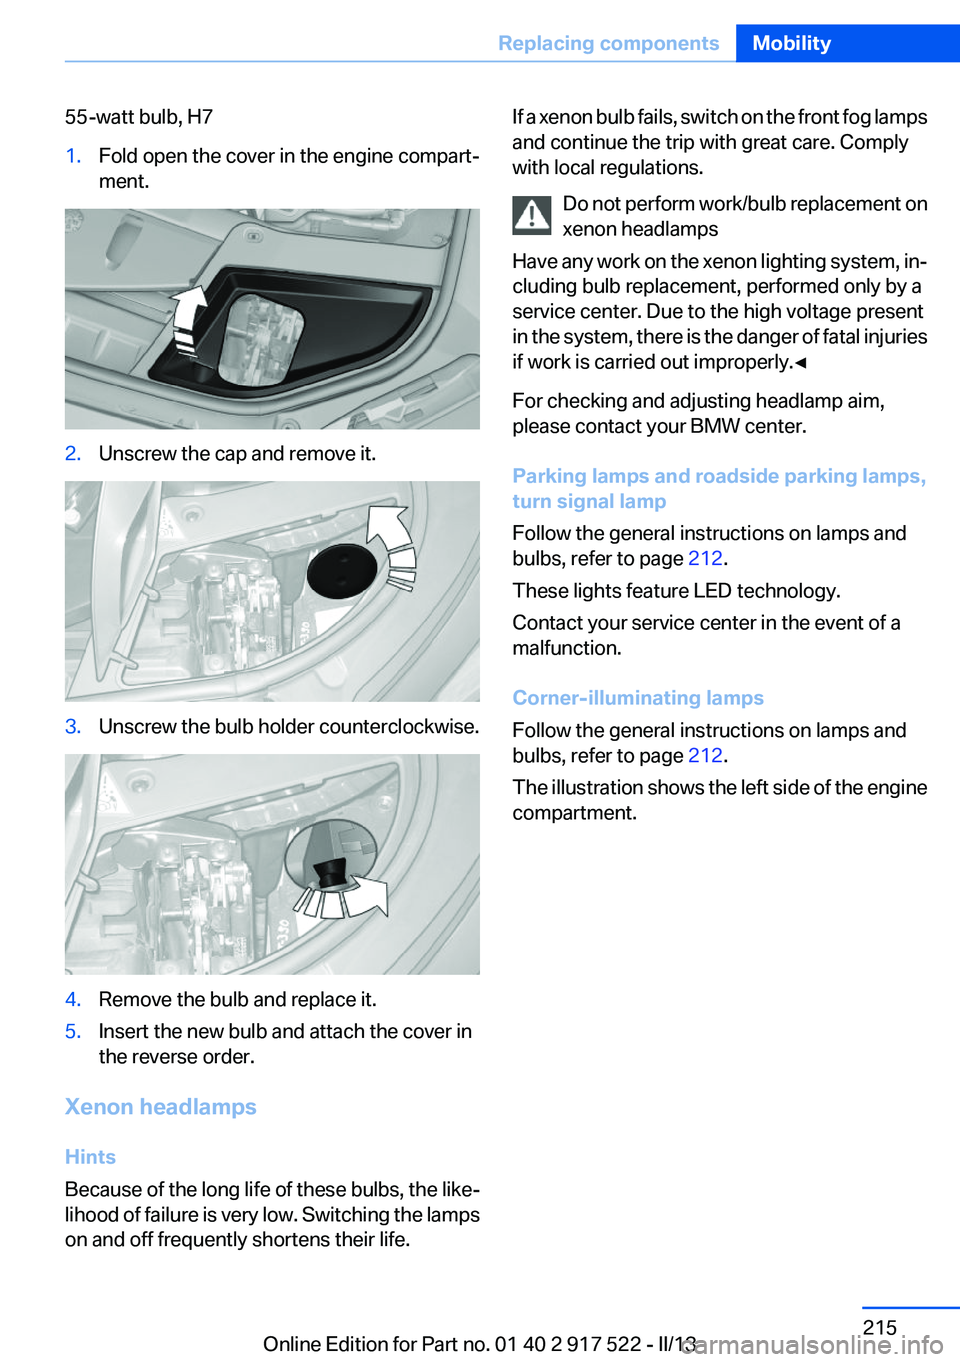 BMW 535I XDRIVE 2013  Owners Manual 55-watt bulb, H71.Fold open the cover in the engine compart‐
ment.2.Unscrew the cap and remove it.3.Unscrew the bulb holder counterclockwise.4.Remove the bulb and replace it.5.Insert the new bulb an